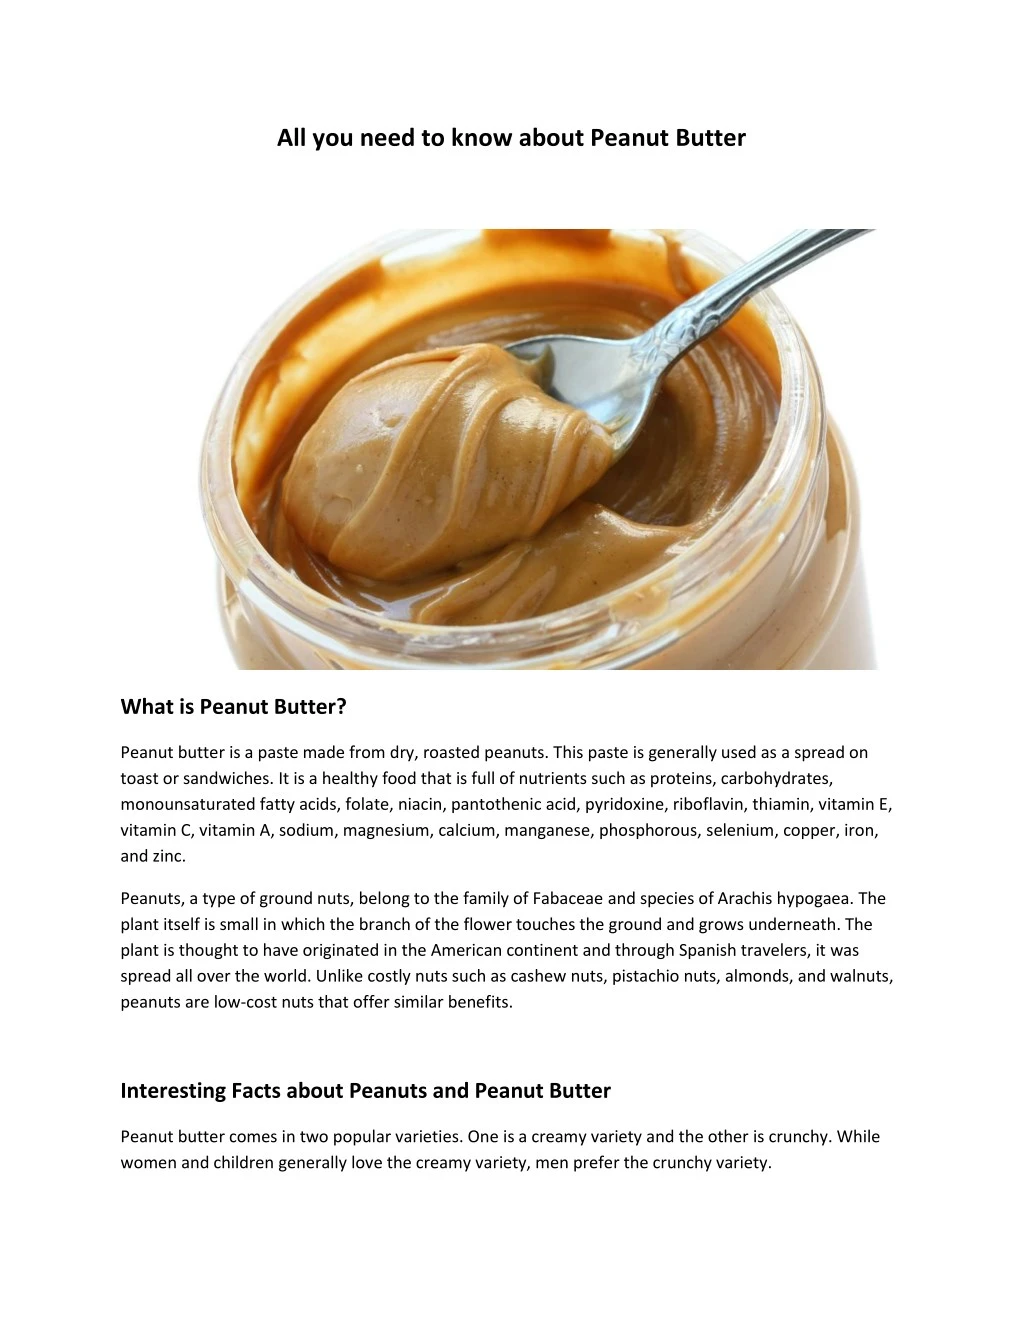 all you need to know about peanut butter